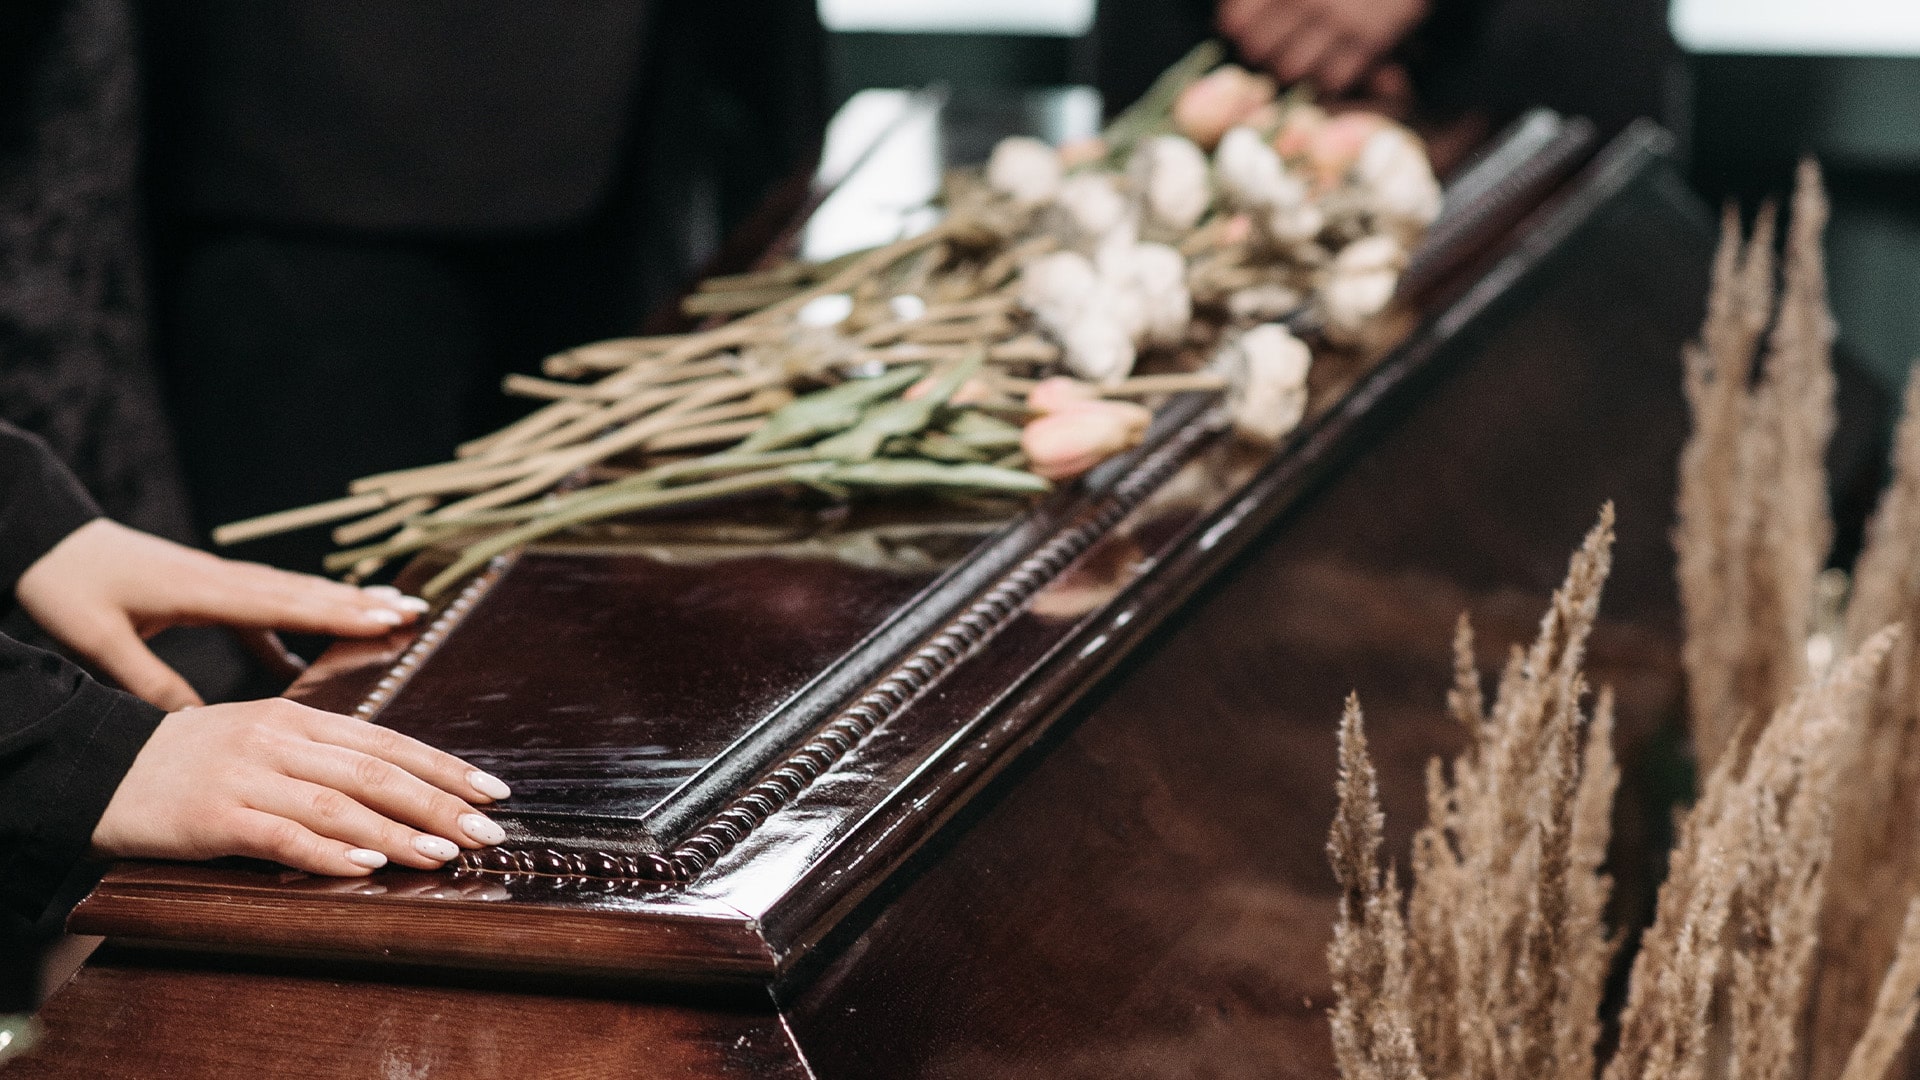 A small group of people standing around a casket